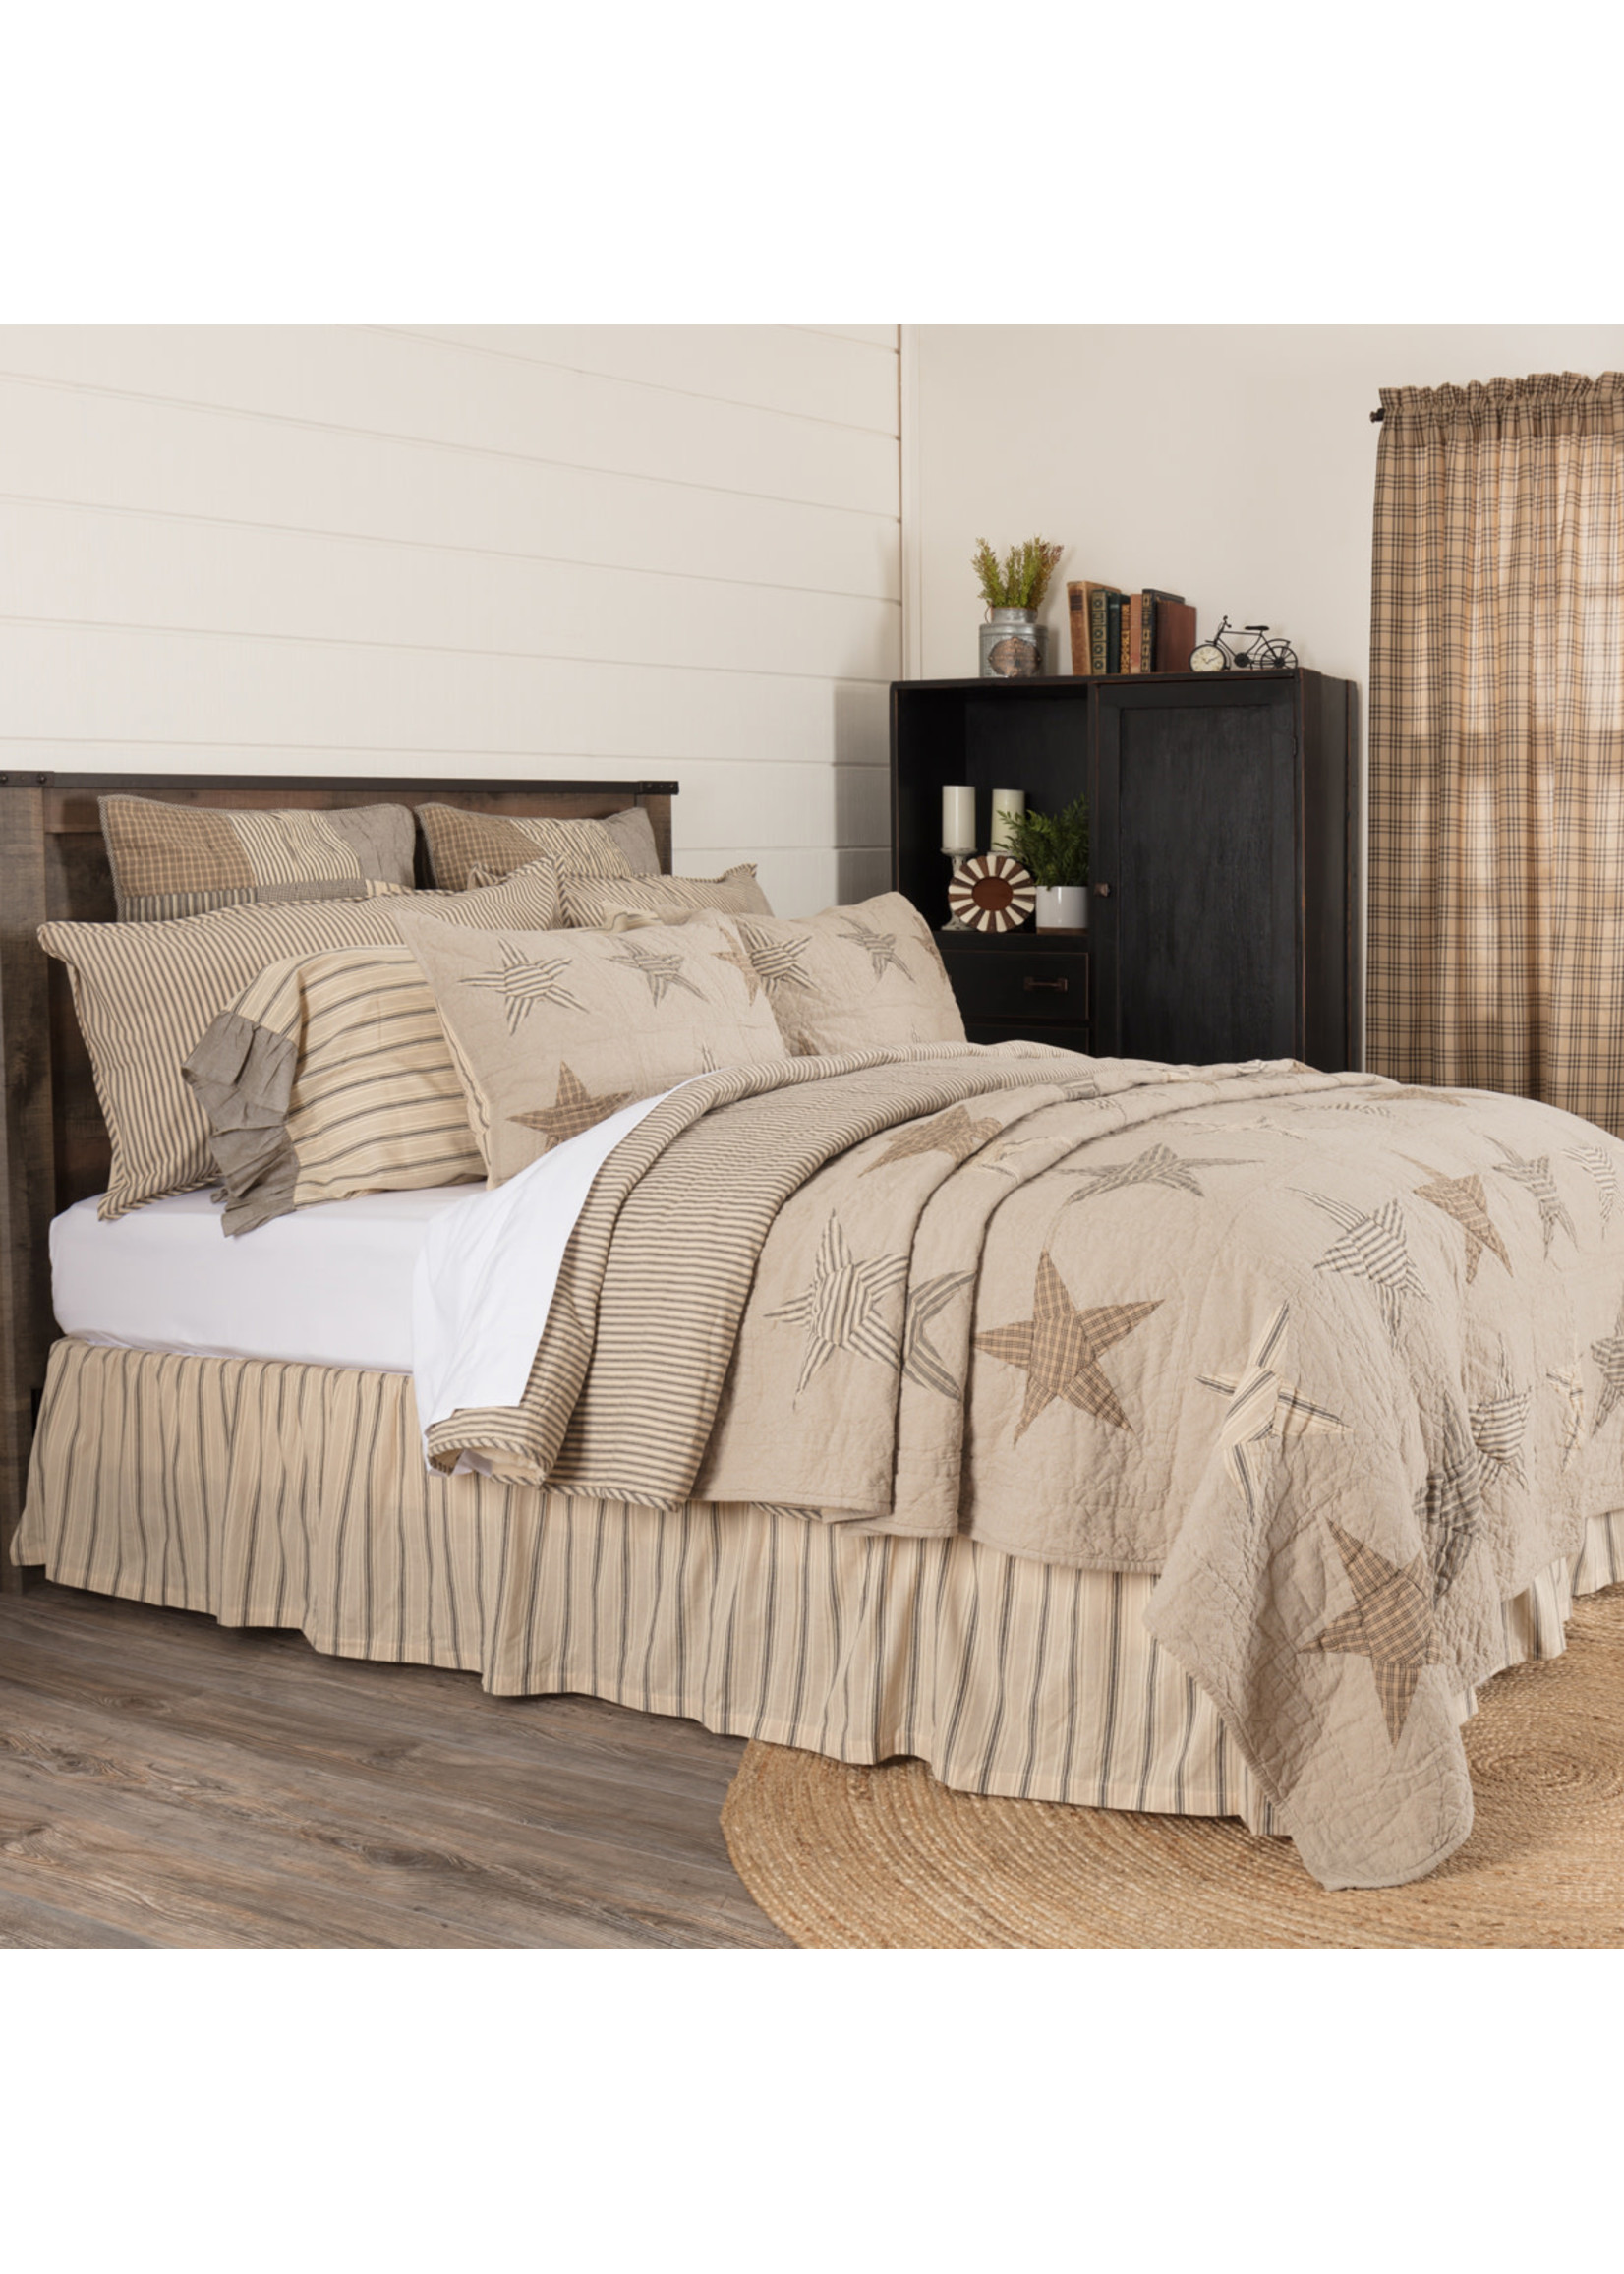 VHC QUEEN STAR SAWYER MILL CHARCOAL QUILT